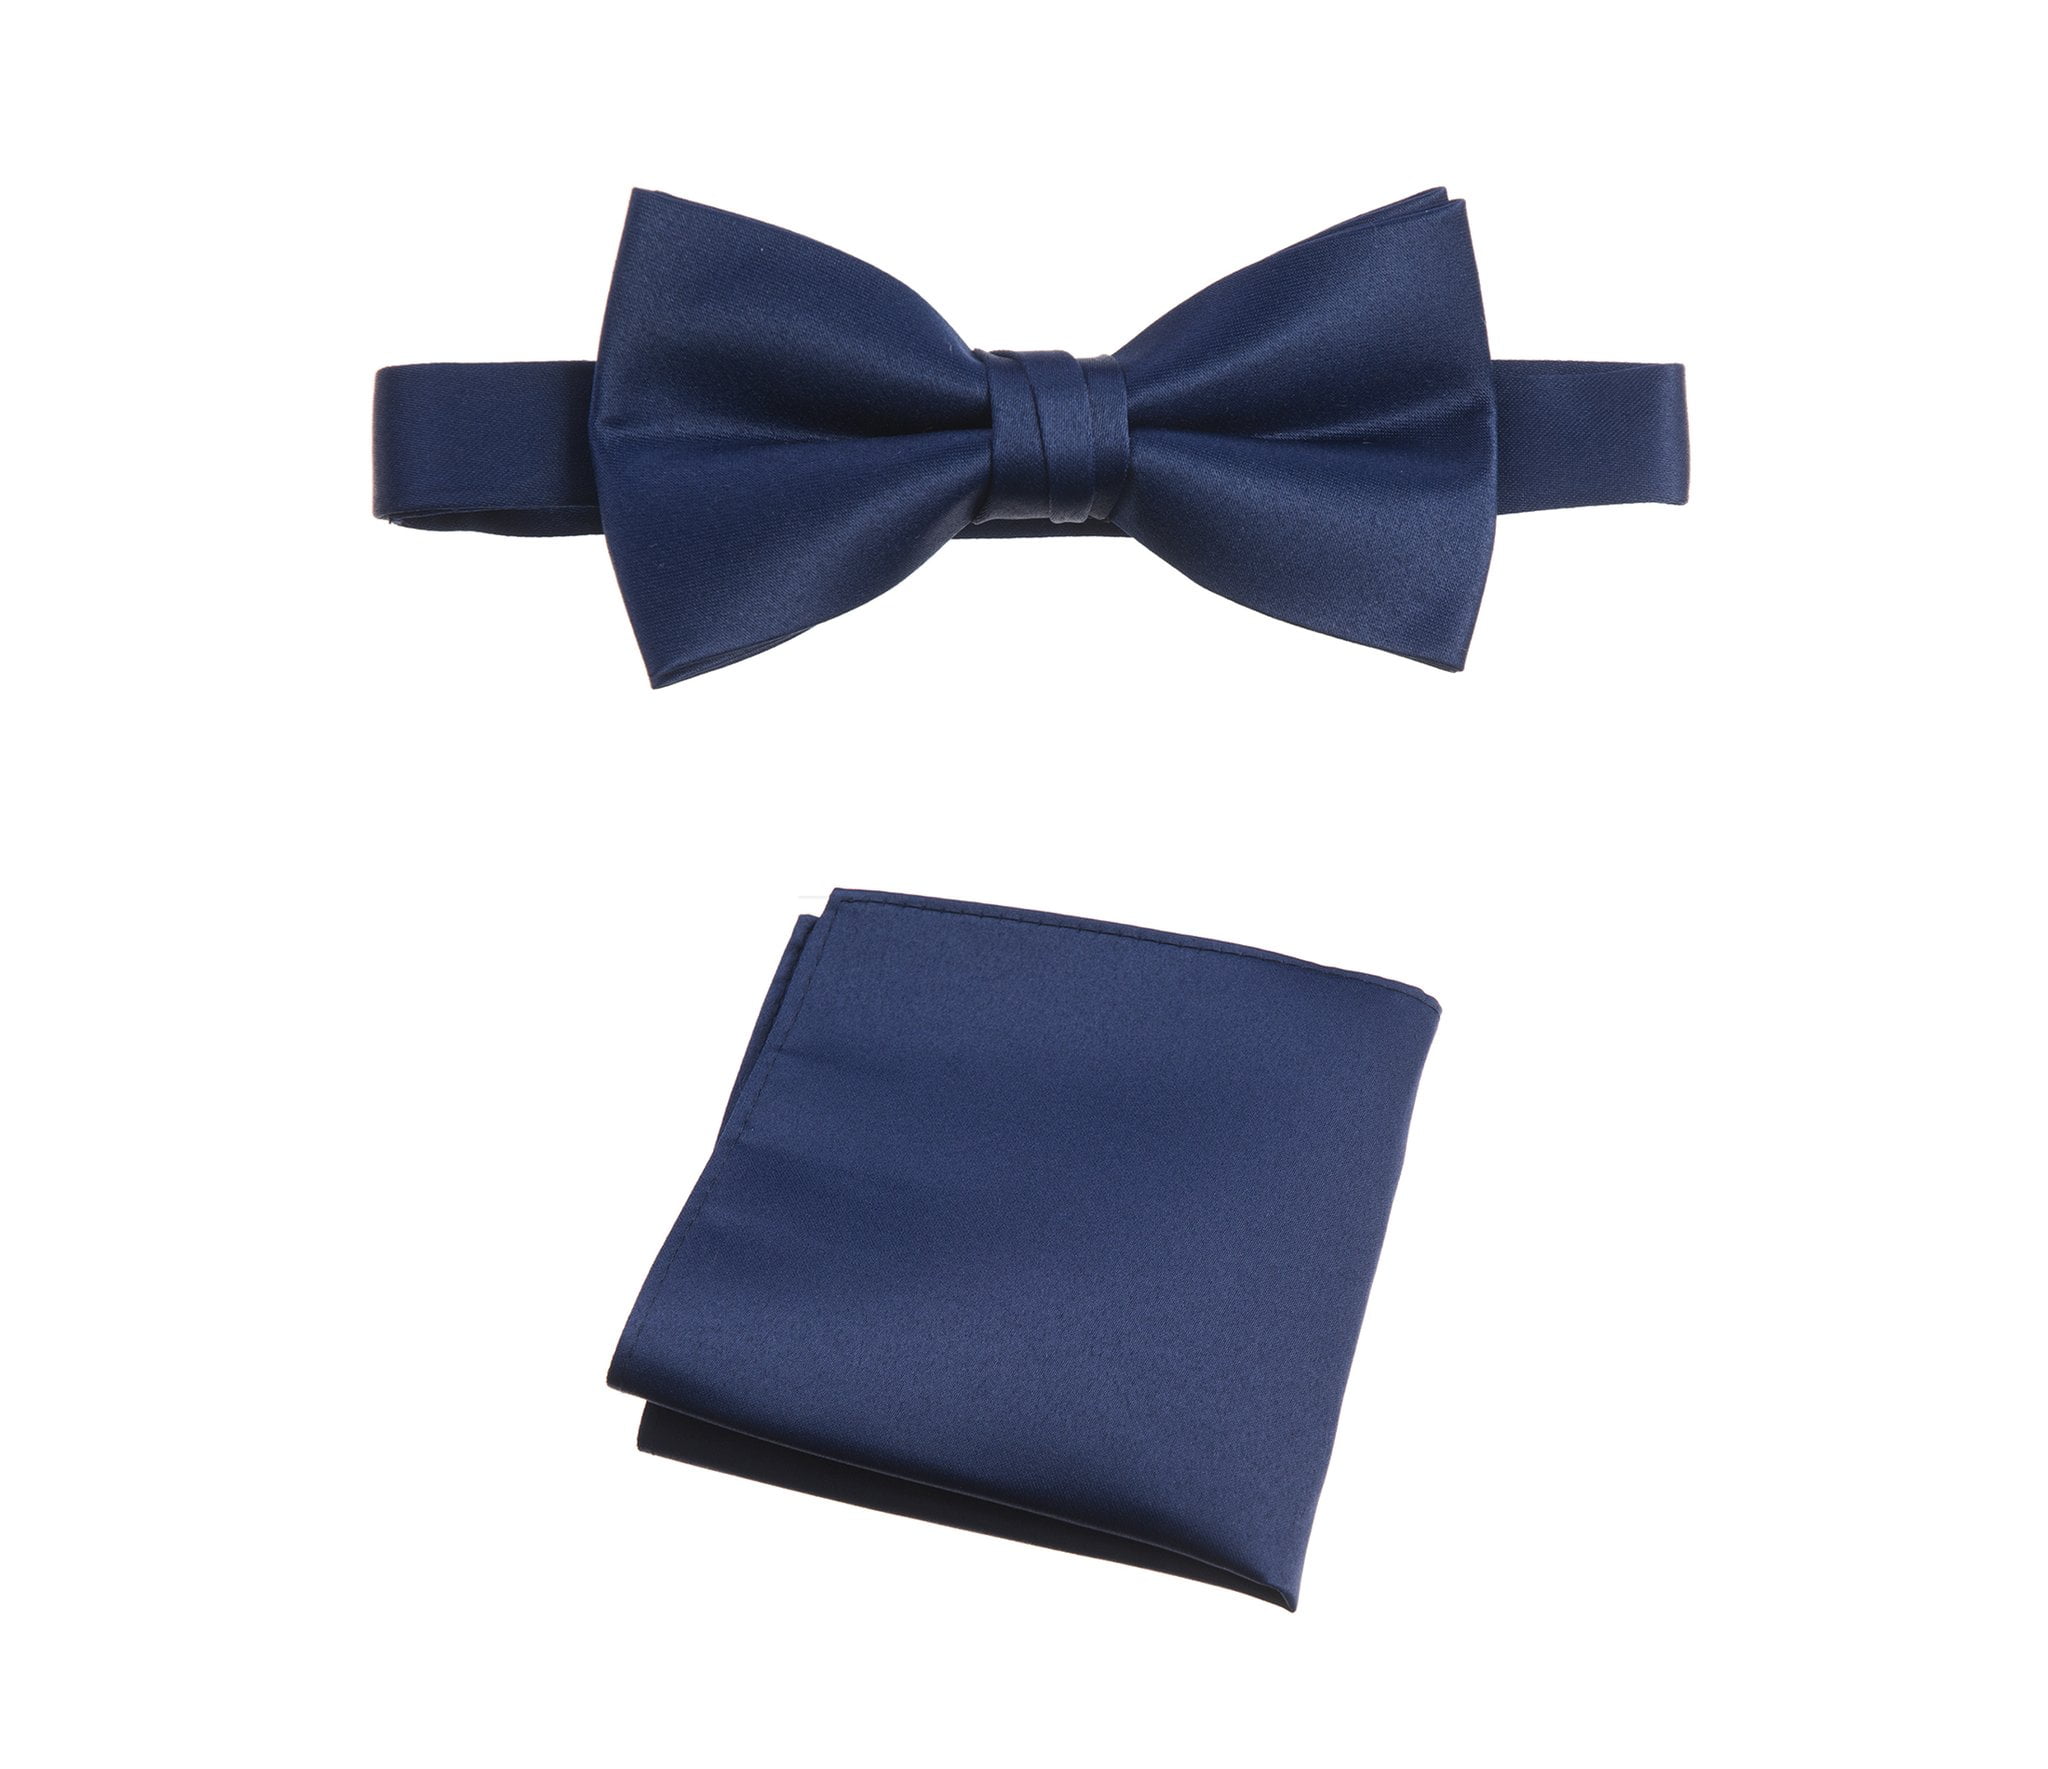 Details about   Men's Pre-tied Bow Tie & hankie set patterned black pink wedding party prom 